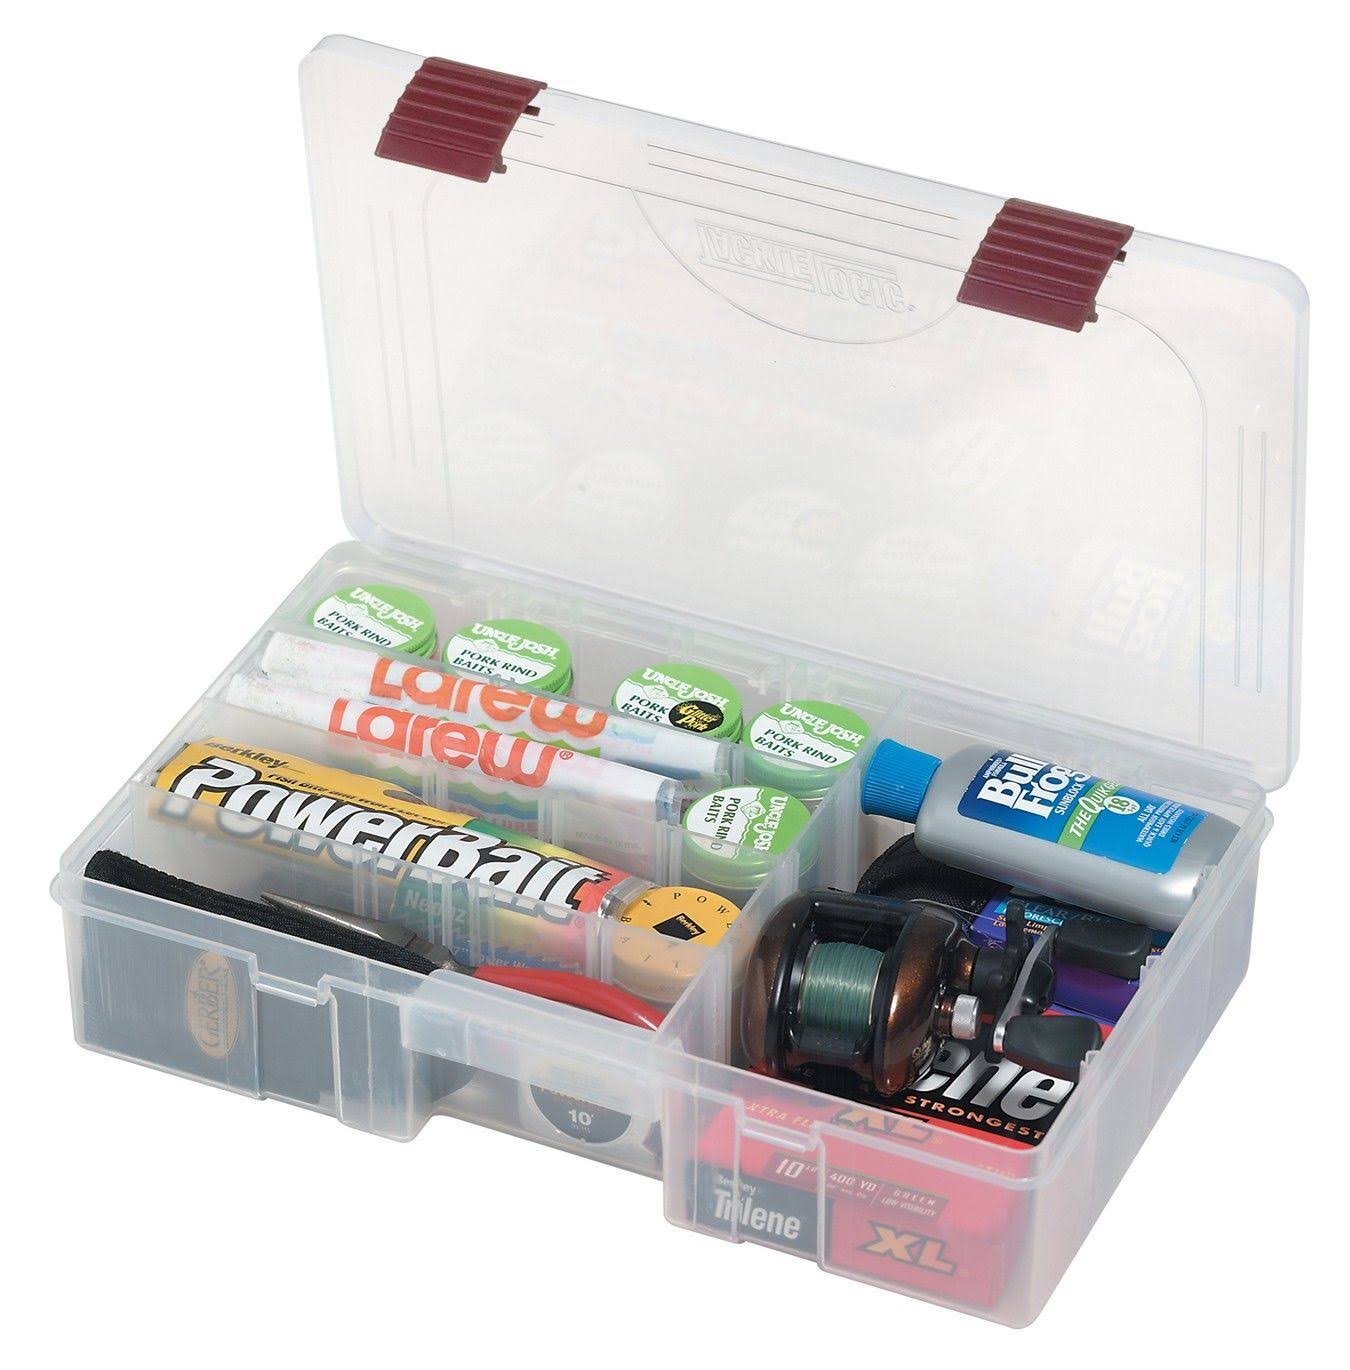 Plano 23780 00 Deep Stowaway Box with Adjustable Dividers